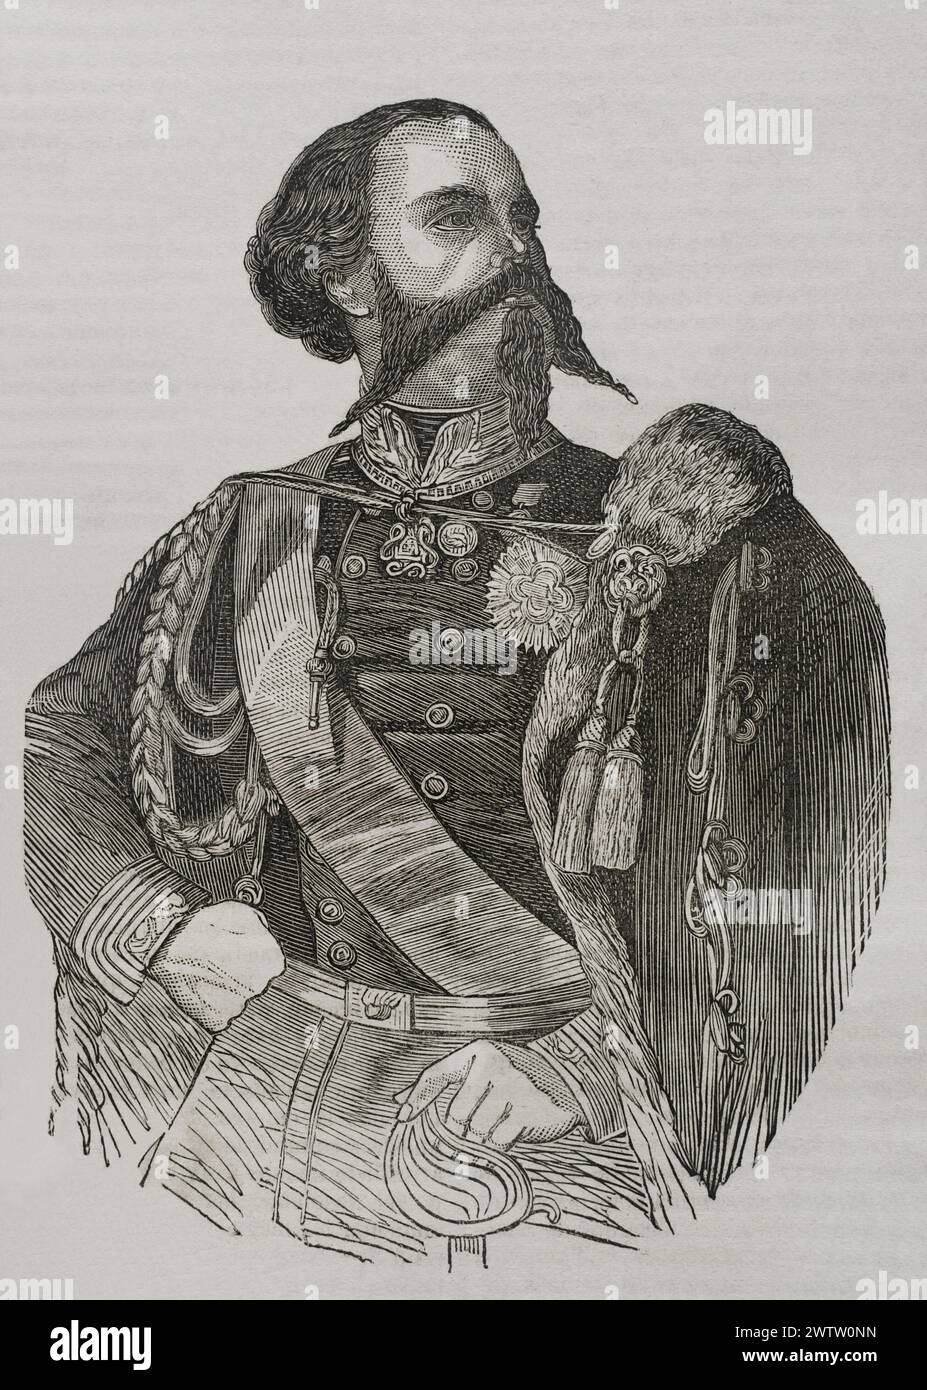 Victor Emmanuel II (1820-1878). Last King of the Kingdom of Sardinia (1849-1861) and the first King of Italy (1861-1878). Portrait. Engraving. 'Historia de la Guerra de Francia y Prusia' (History of the War between France and Prussia). Volume II. Published in Barcelona, 1871. Stock Photo